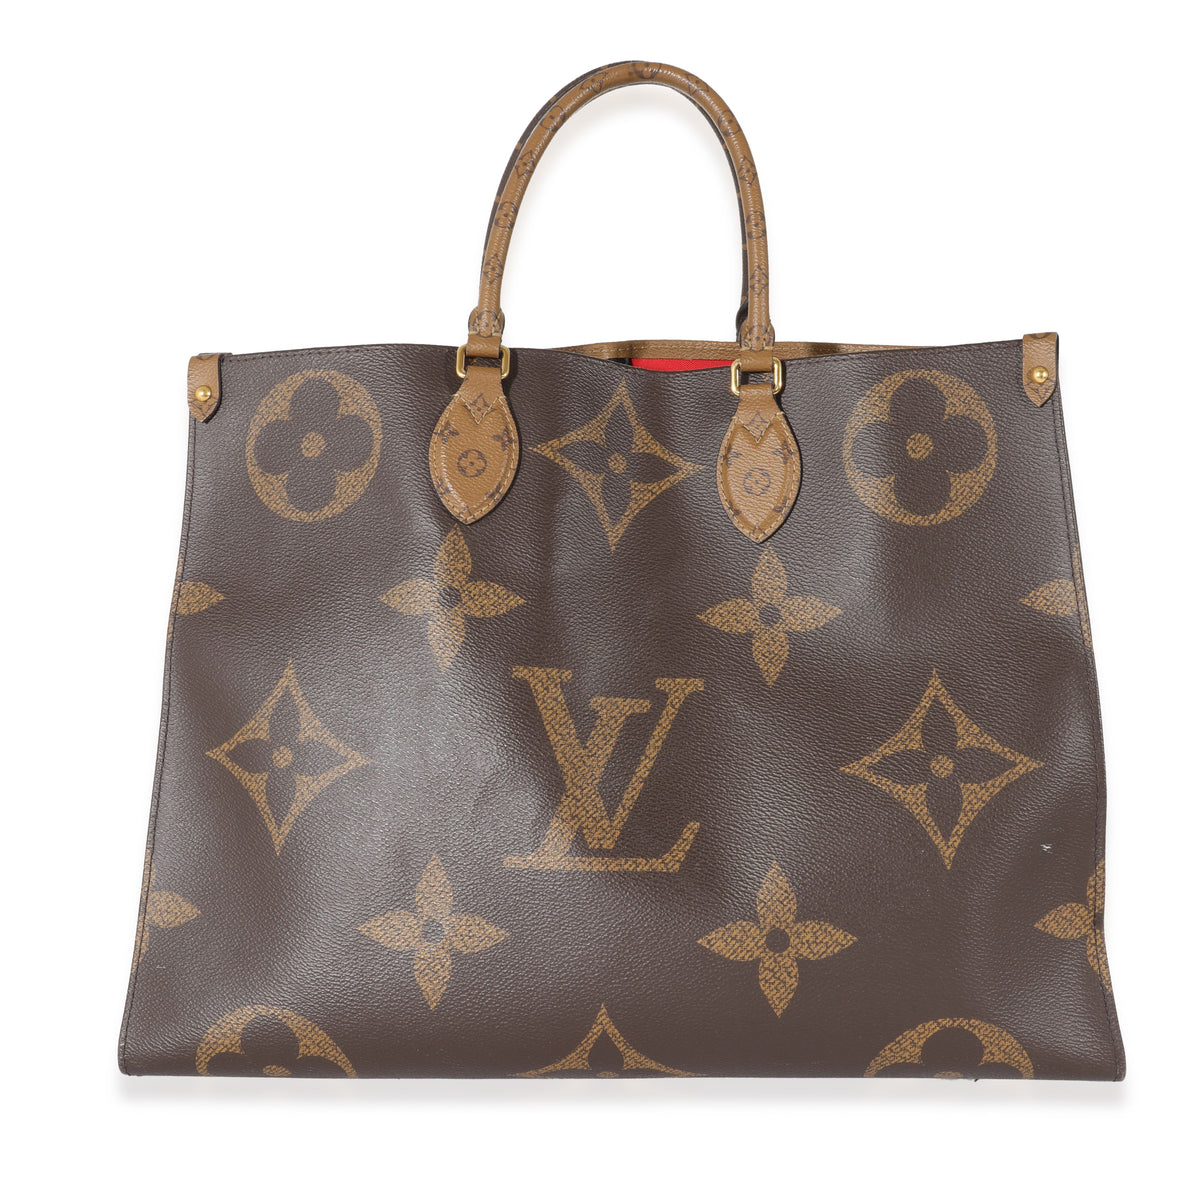 Why I Exchanged my Louis Vuitton Onthego GM Reverse Monogram